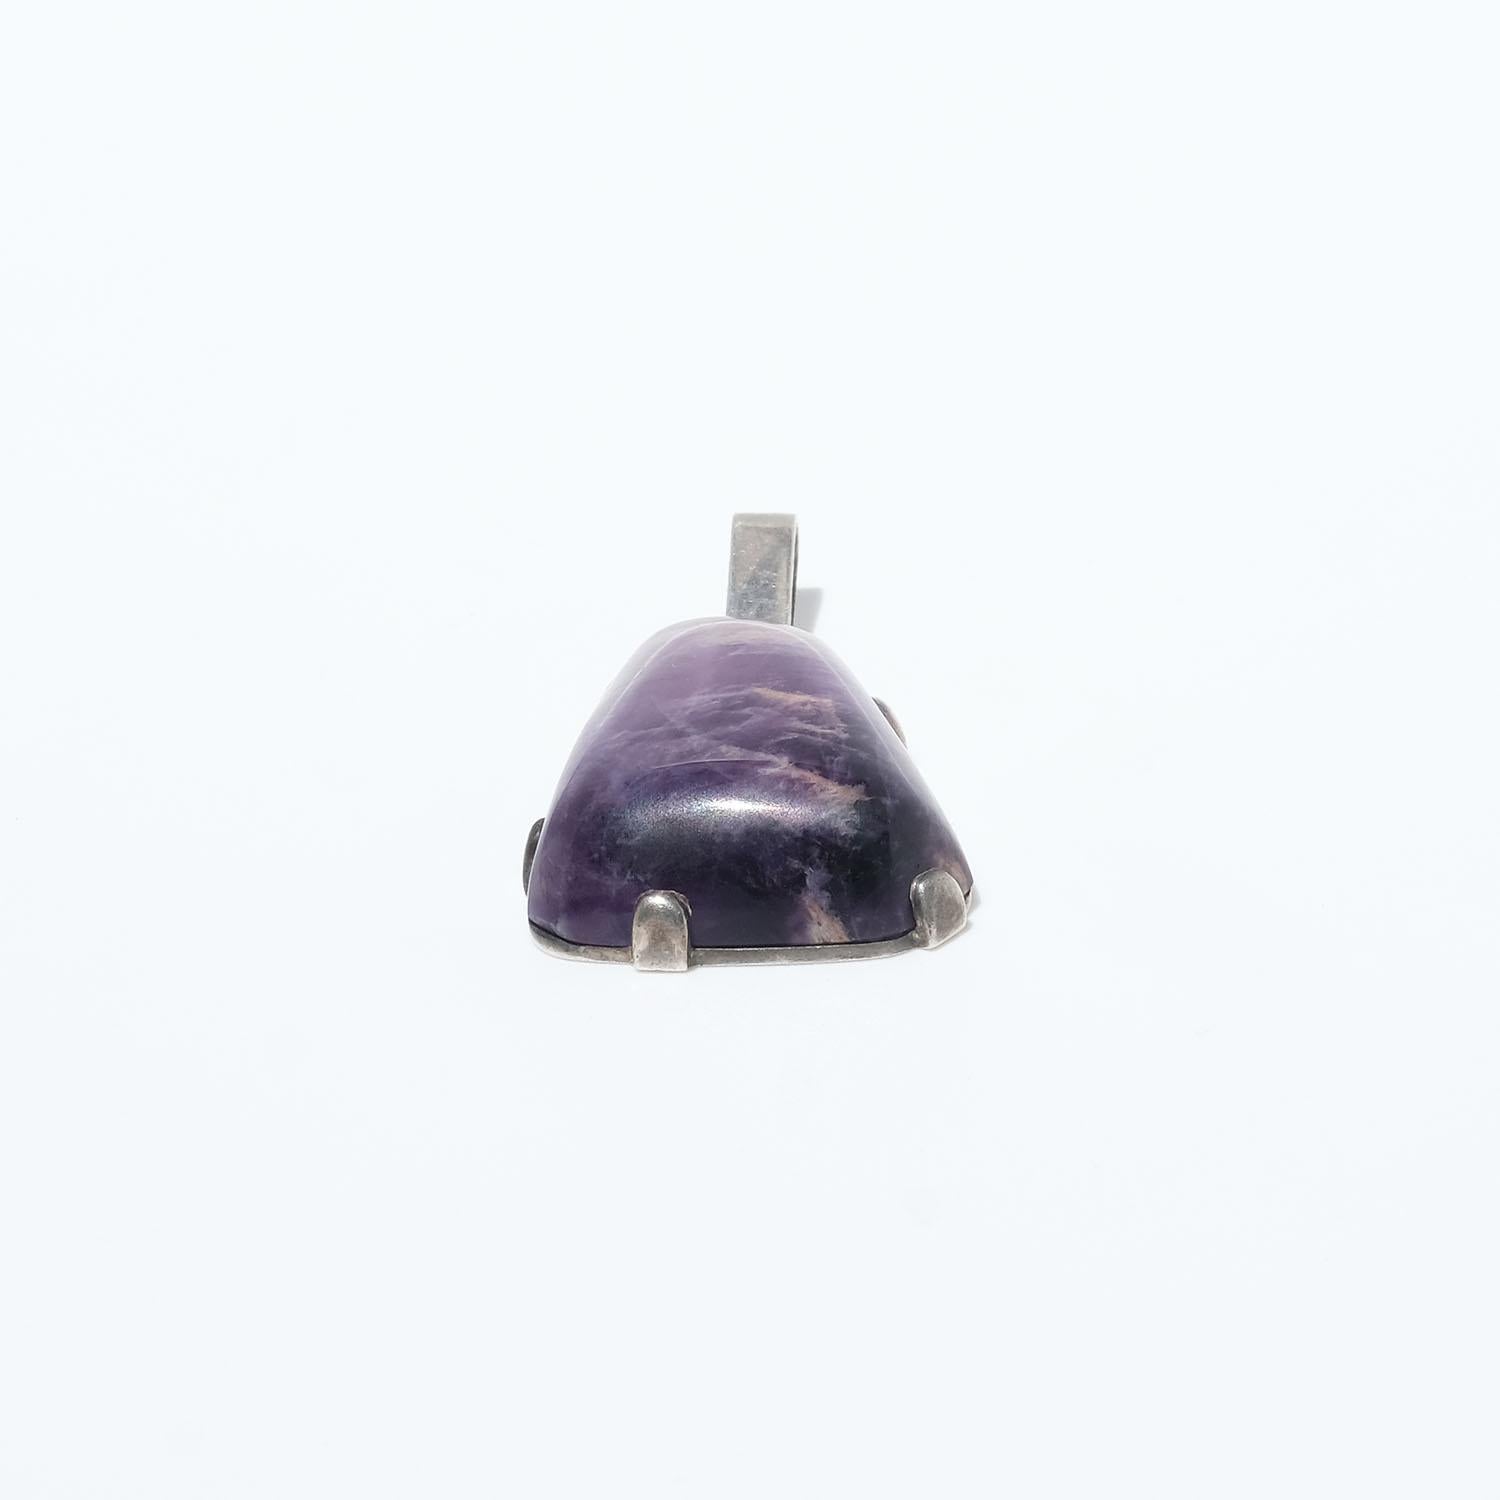 This pendant has an amethyst quartz with a cabochon, free formed cut. The setting and the bail is made of silver.

The pendant is perfect for any social event as well as for the everyday wardrobe. 

Dimensions: amethyst wd./ht. 20/28, wt. 12 gm